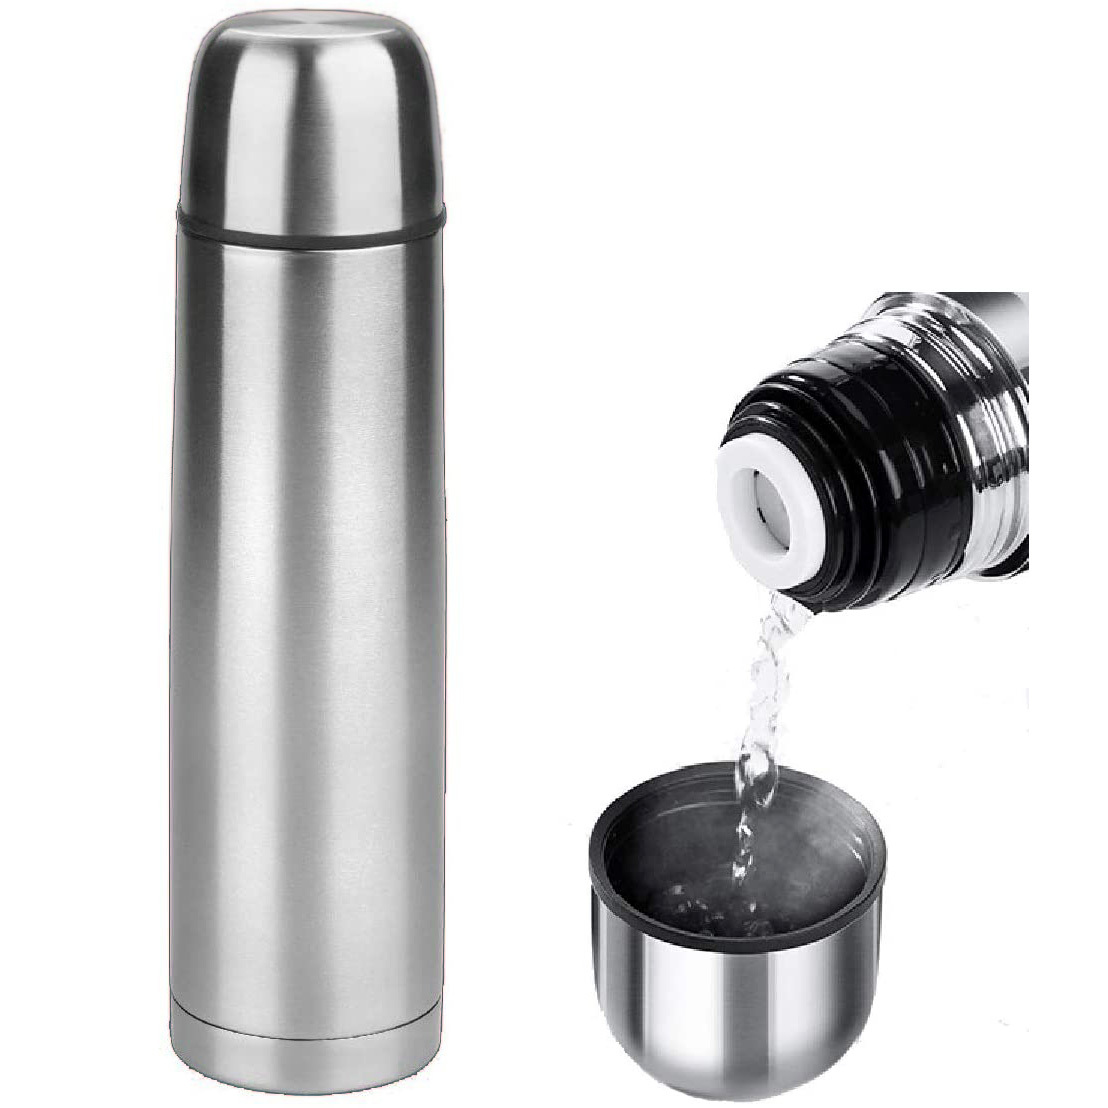 1L Large Stainless Steel Thermal Flask Insulated Water Bottle (1000ml)